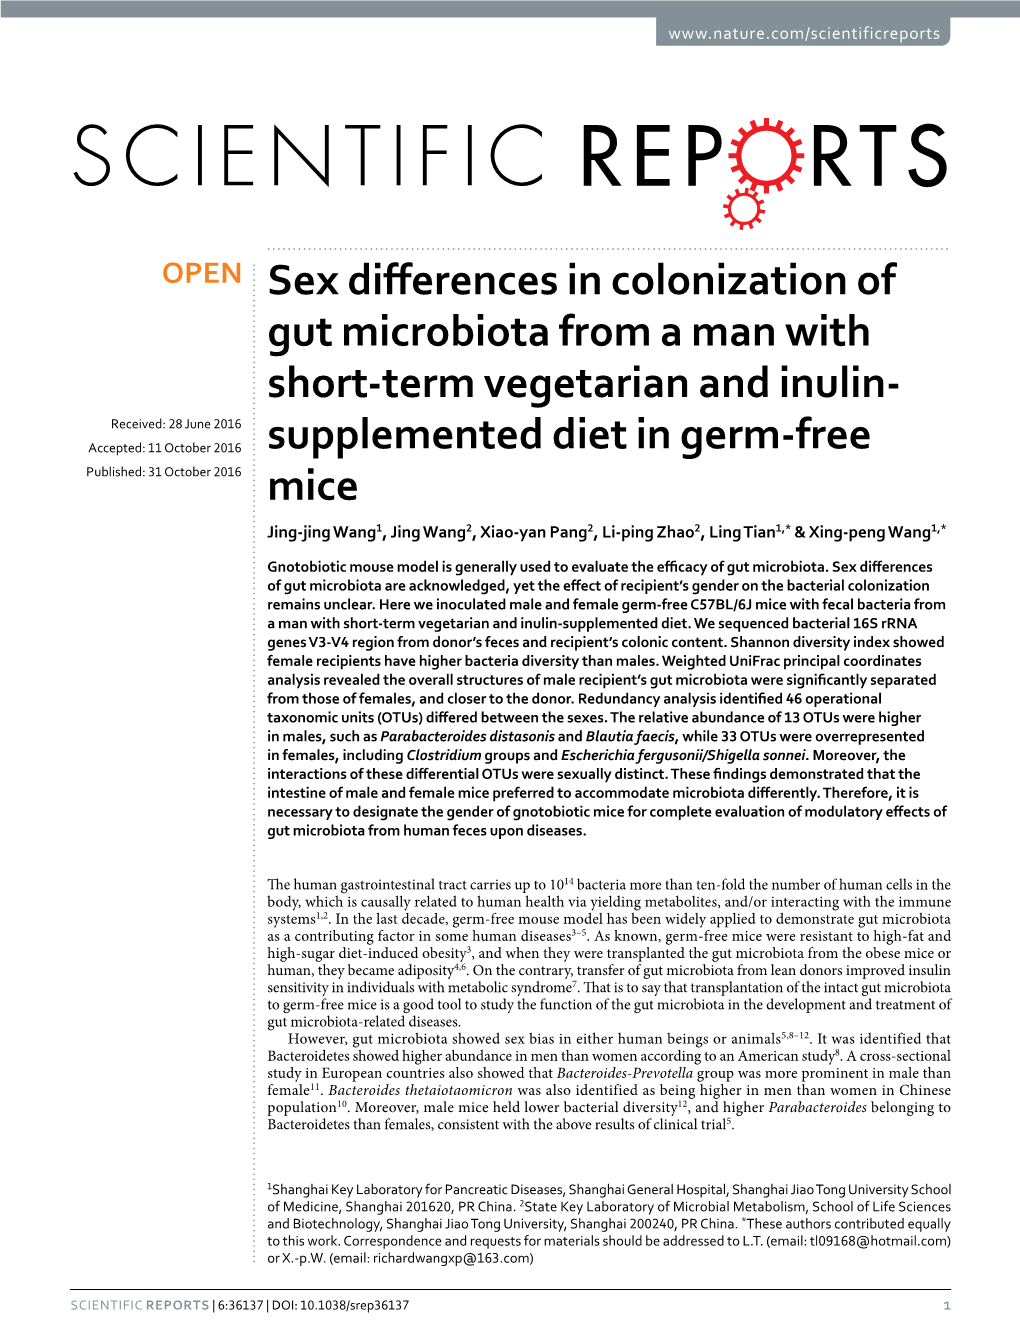 Sex Differences in Colonization of Gut Microbiota from a Man with Short